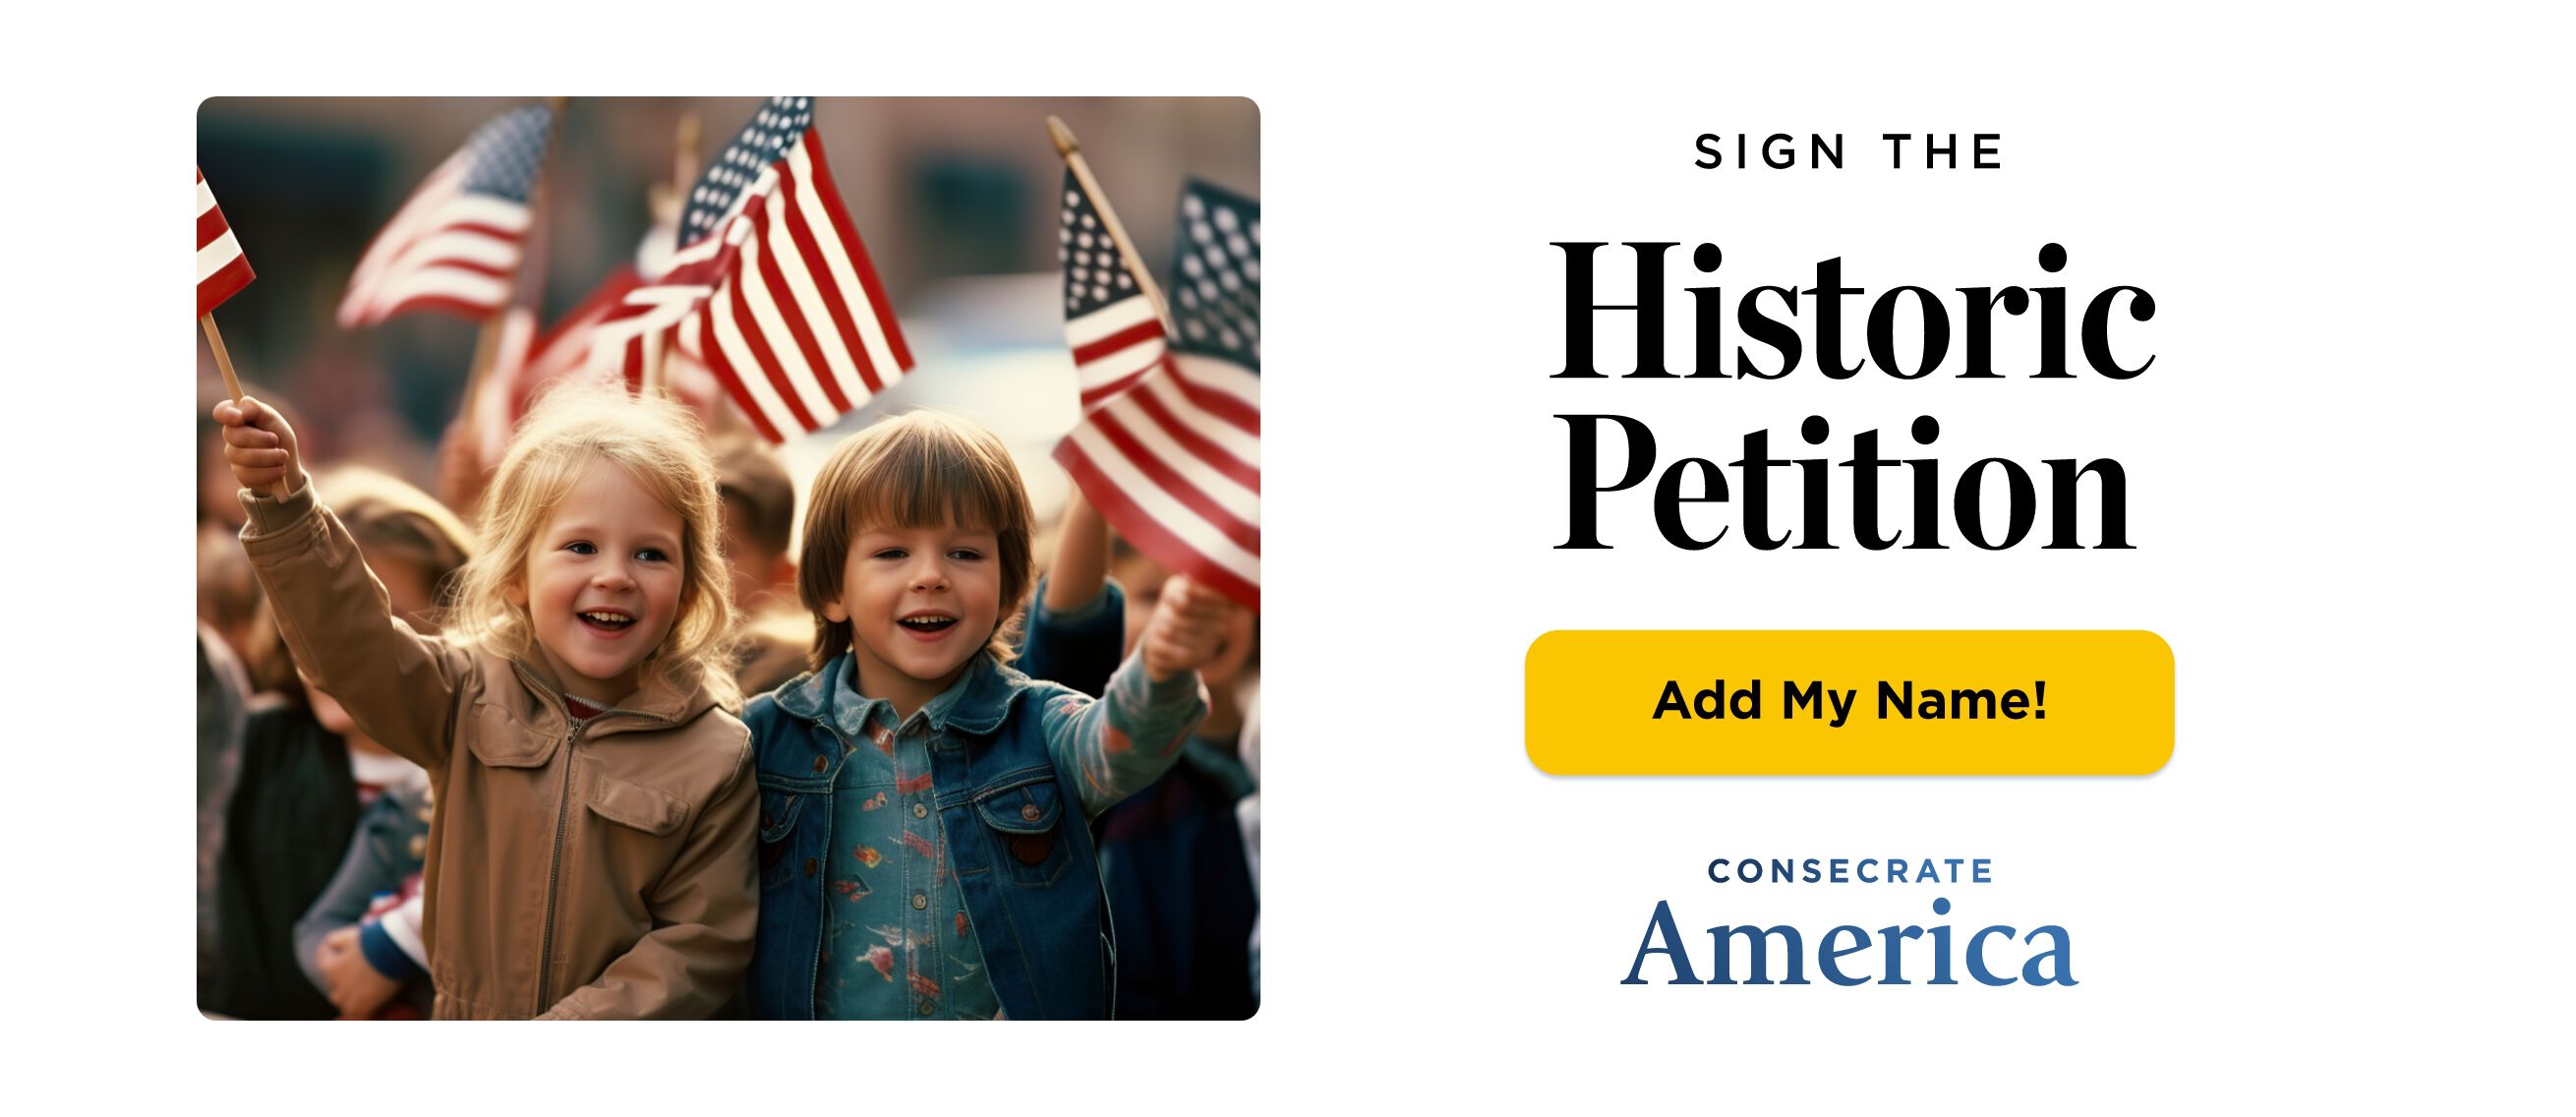 Sign the historic Petition